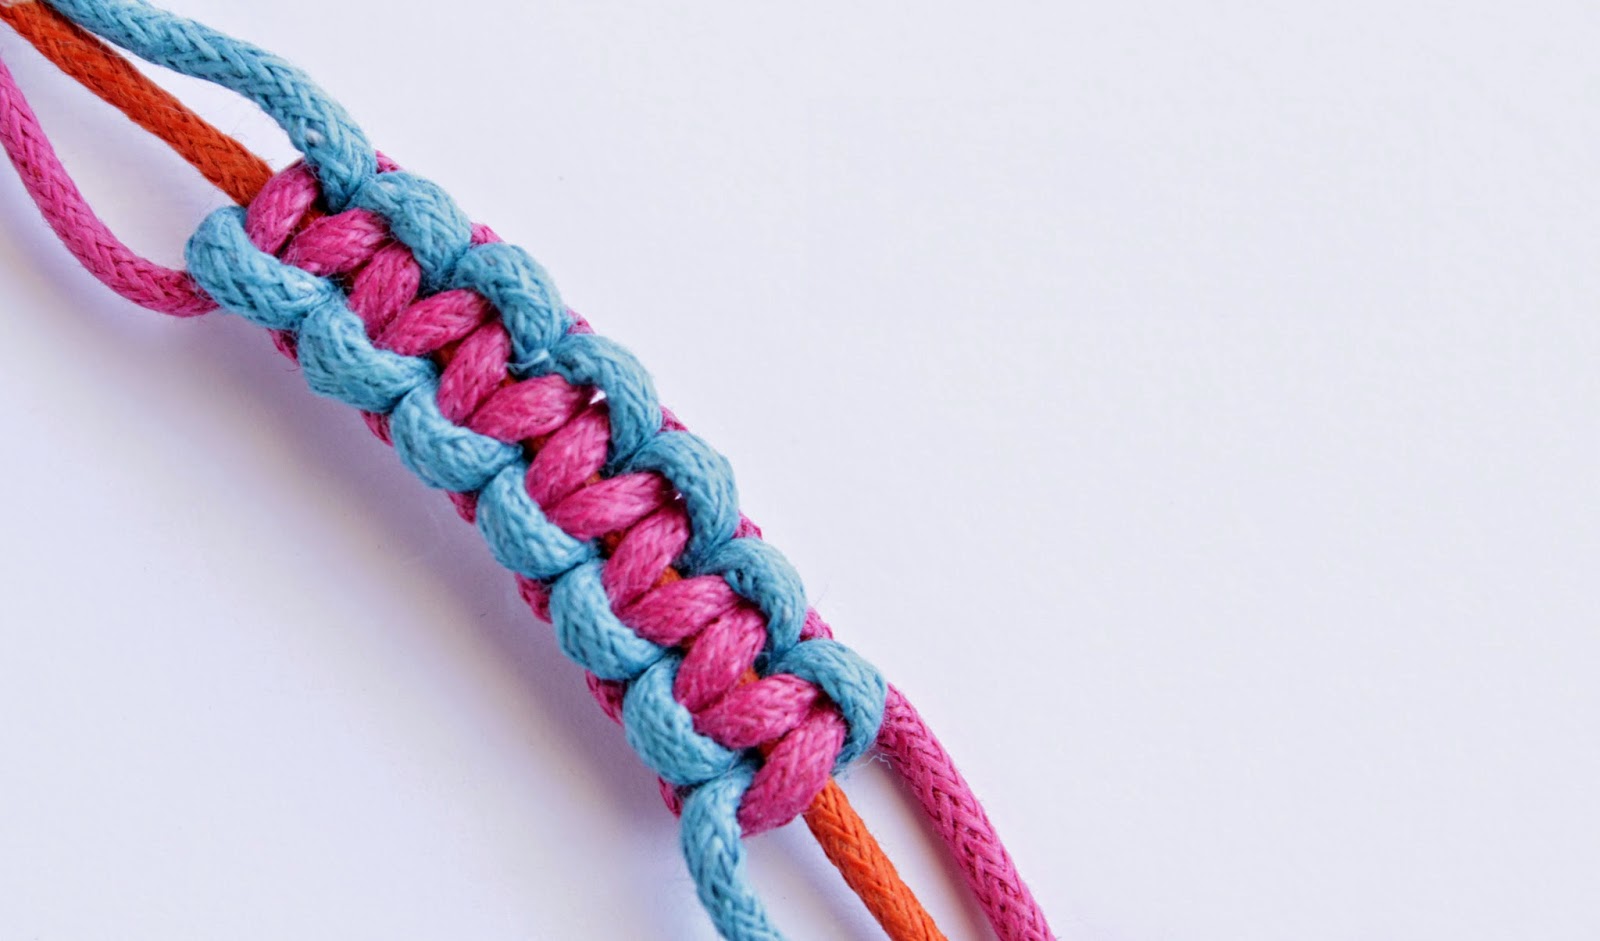 http://curlymade.blogspot.pt/2014/10/back-to-basics-how-to-make-square-knot.html